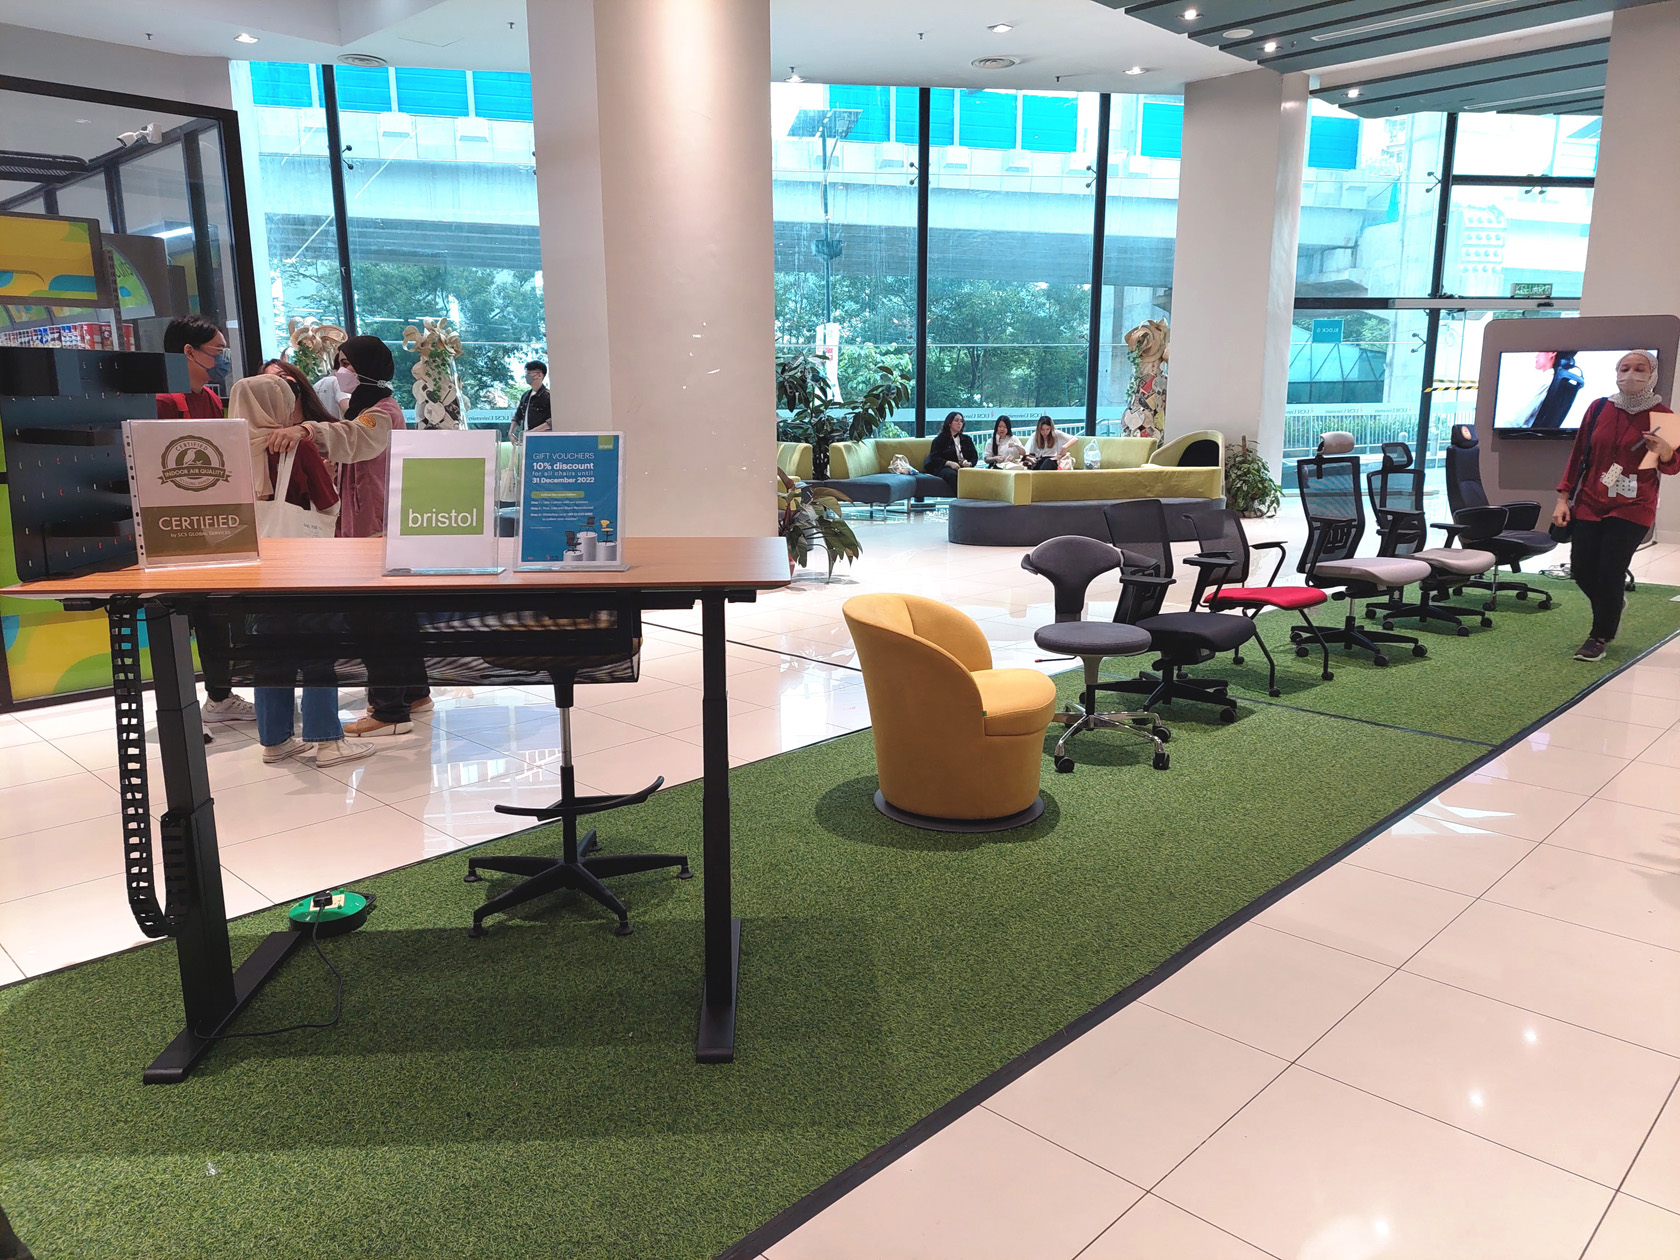 Bristol office chairs and table displayed on a green carpet in USCI University